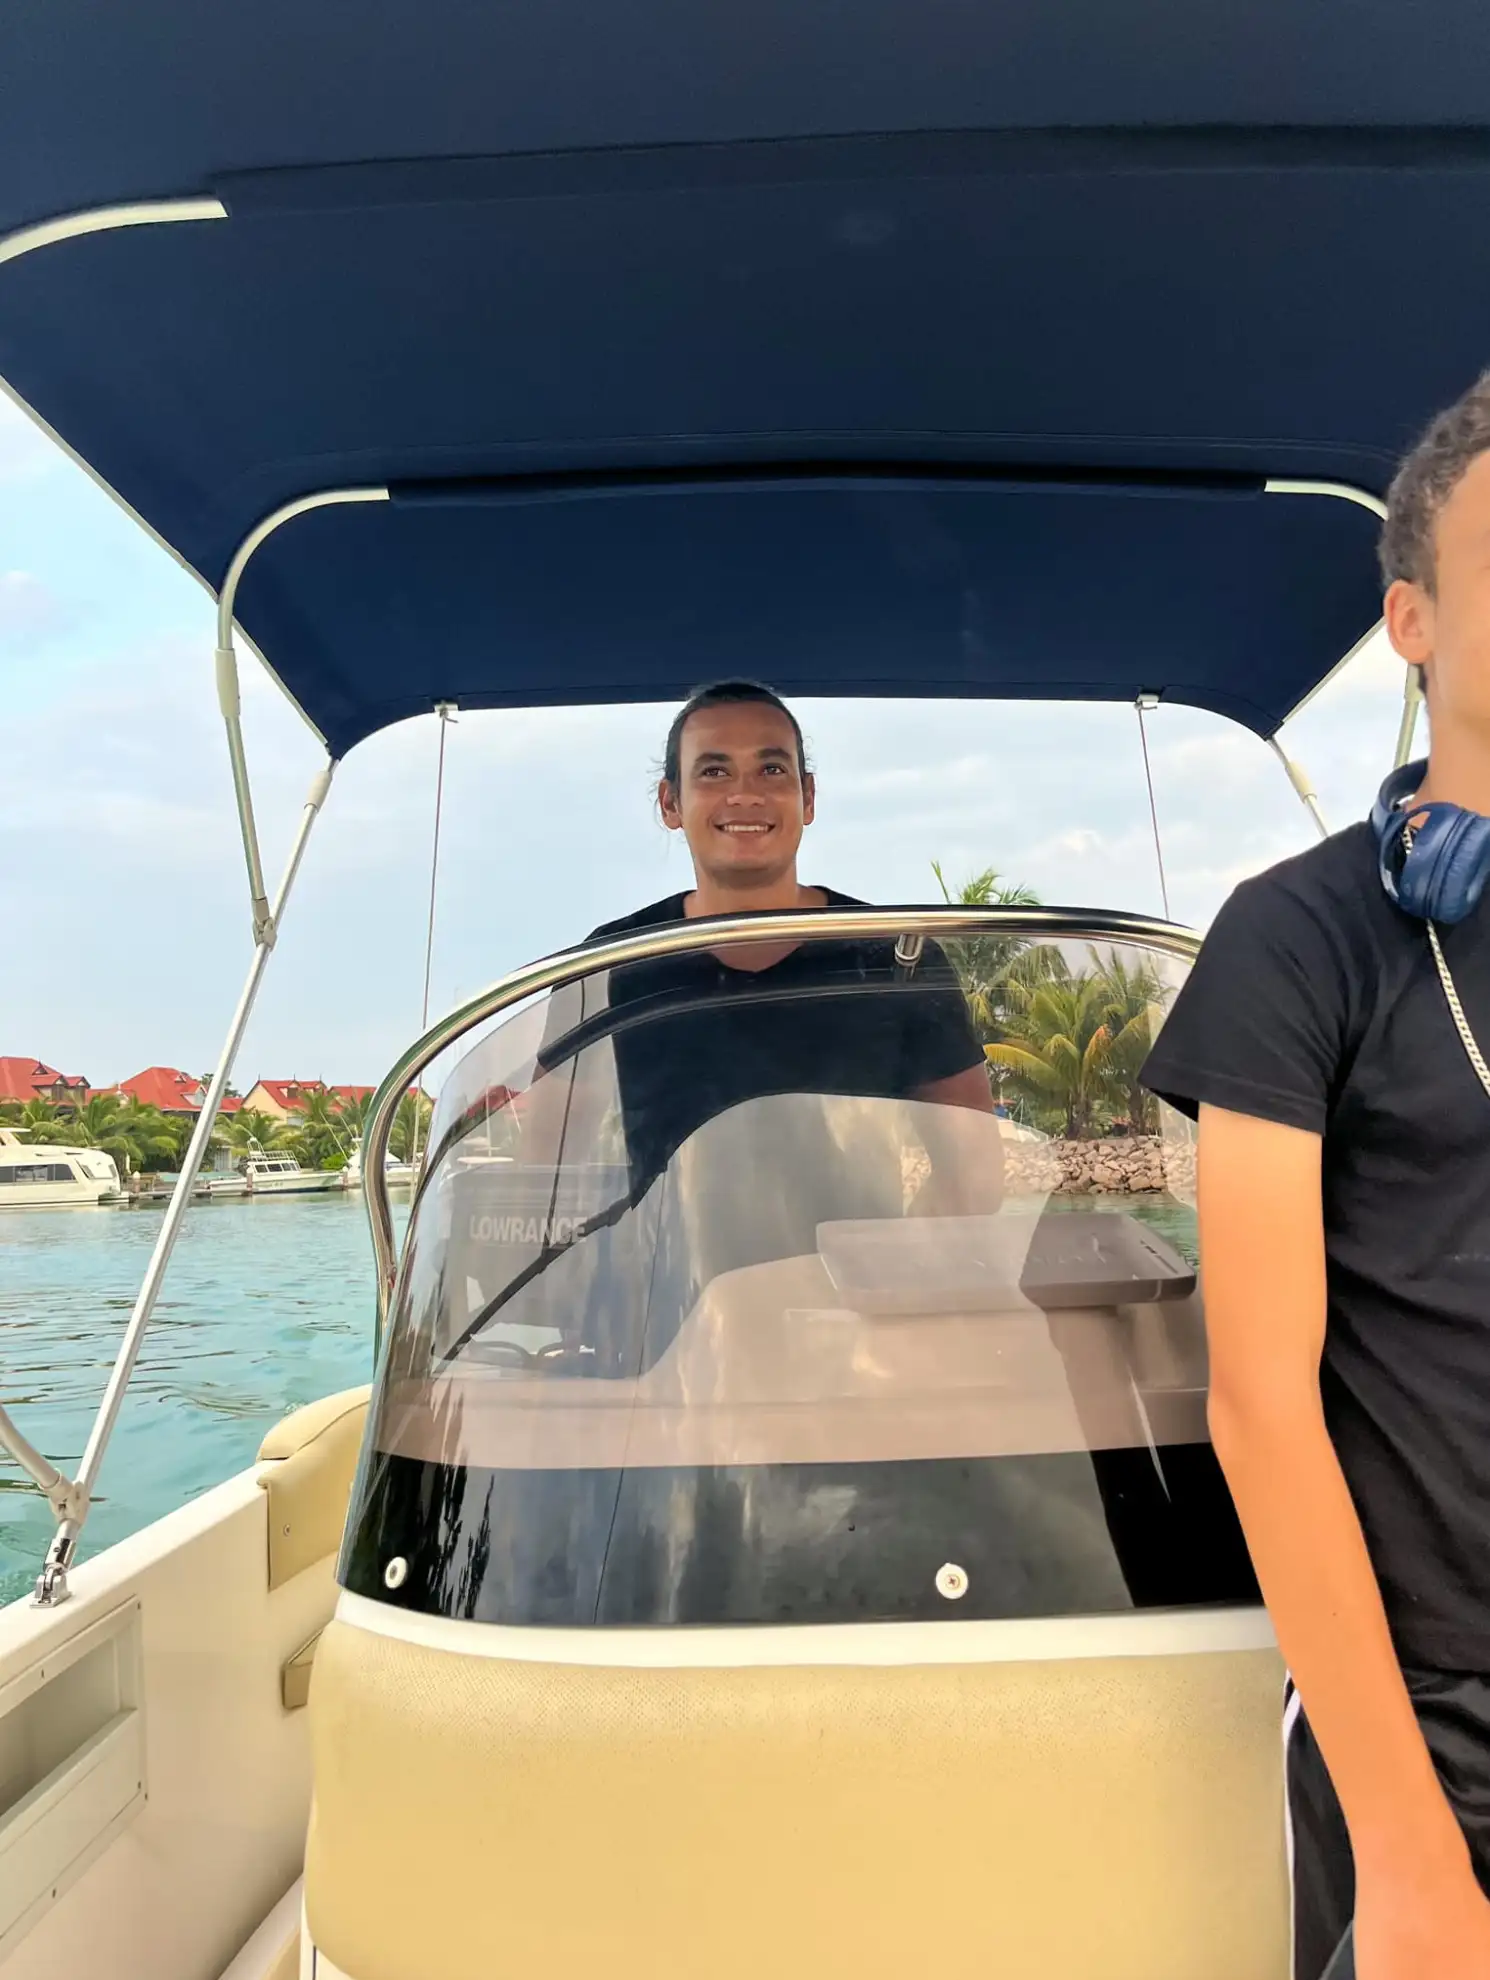 Your friendly captain on the boat. Always happy to assist the guest with anything.